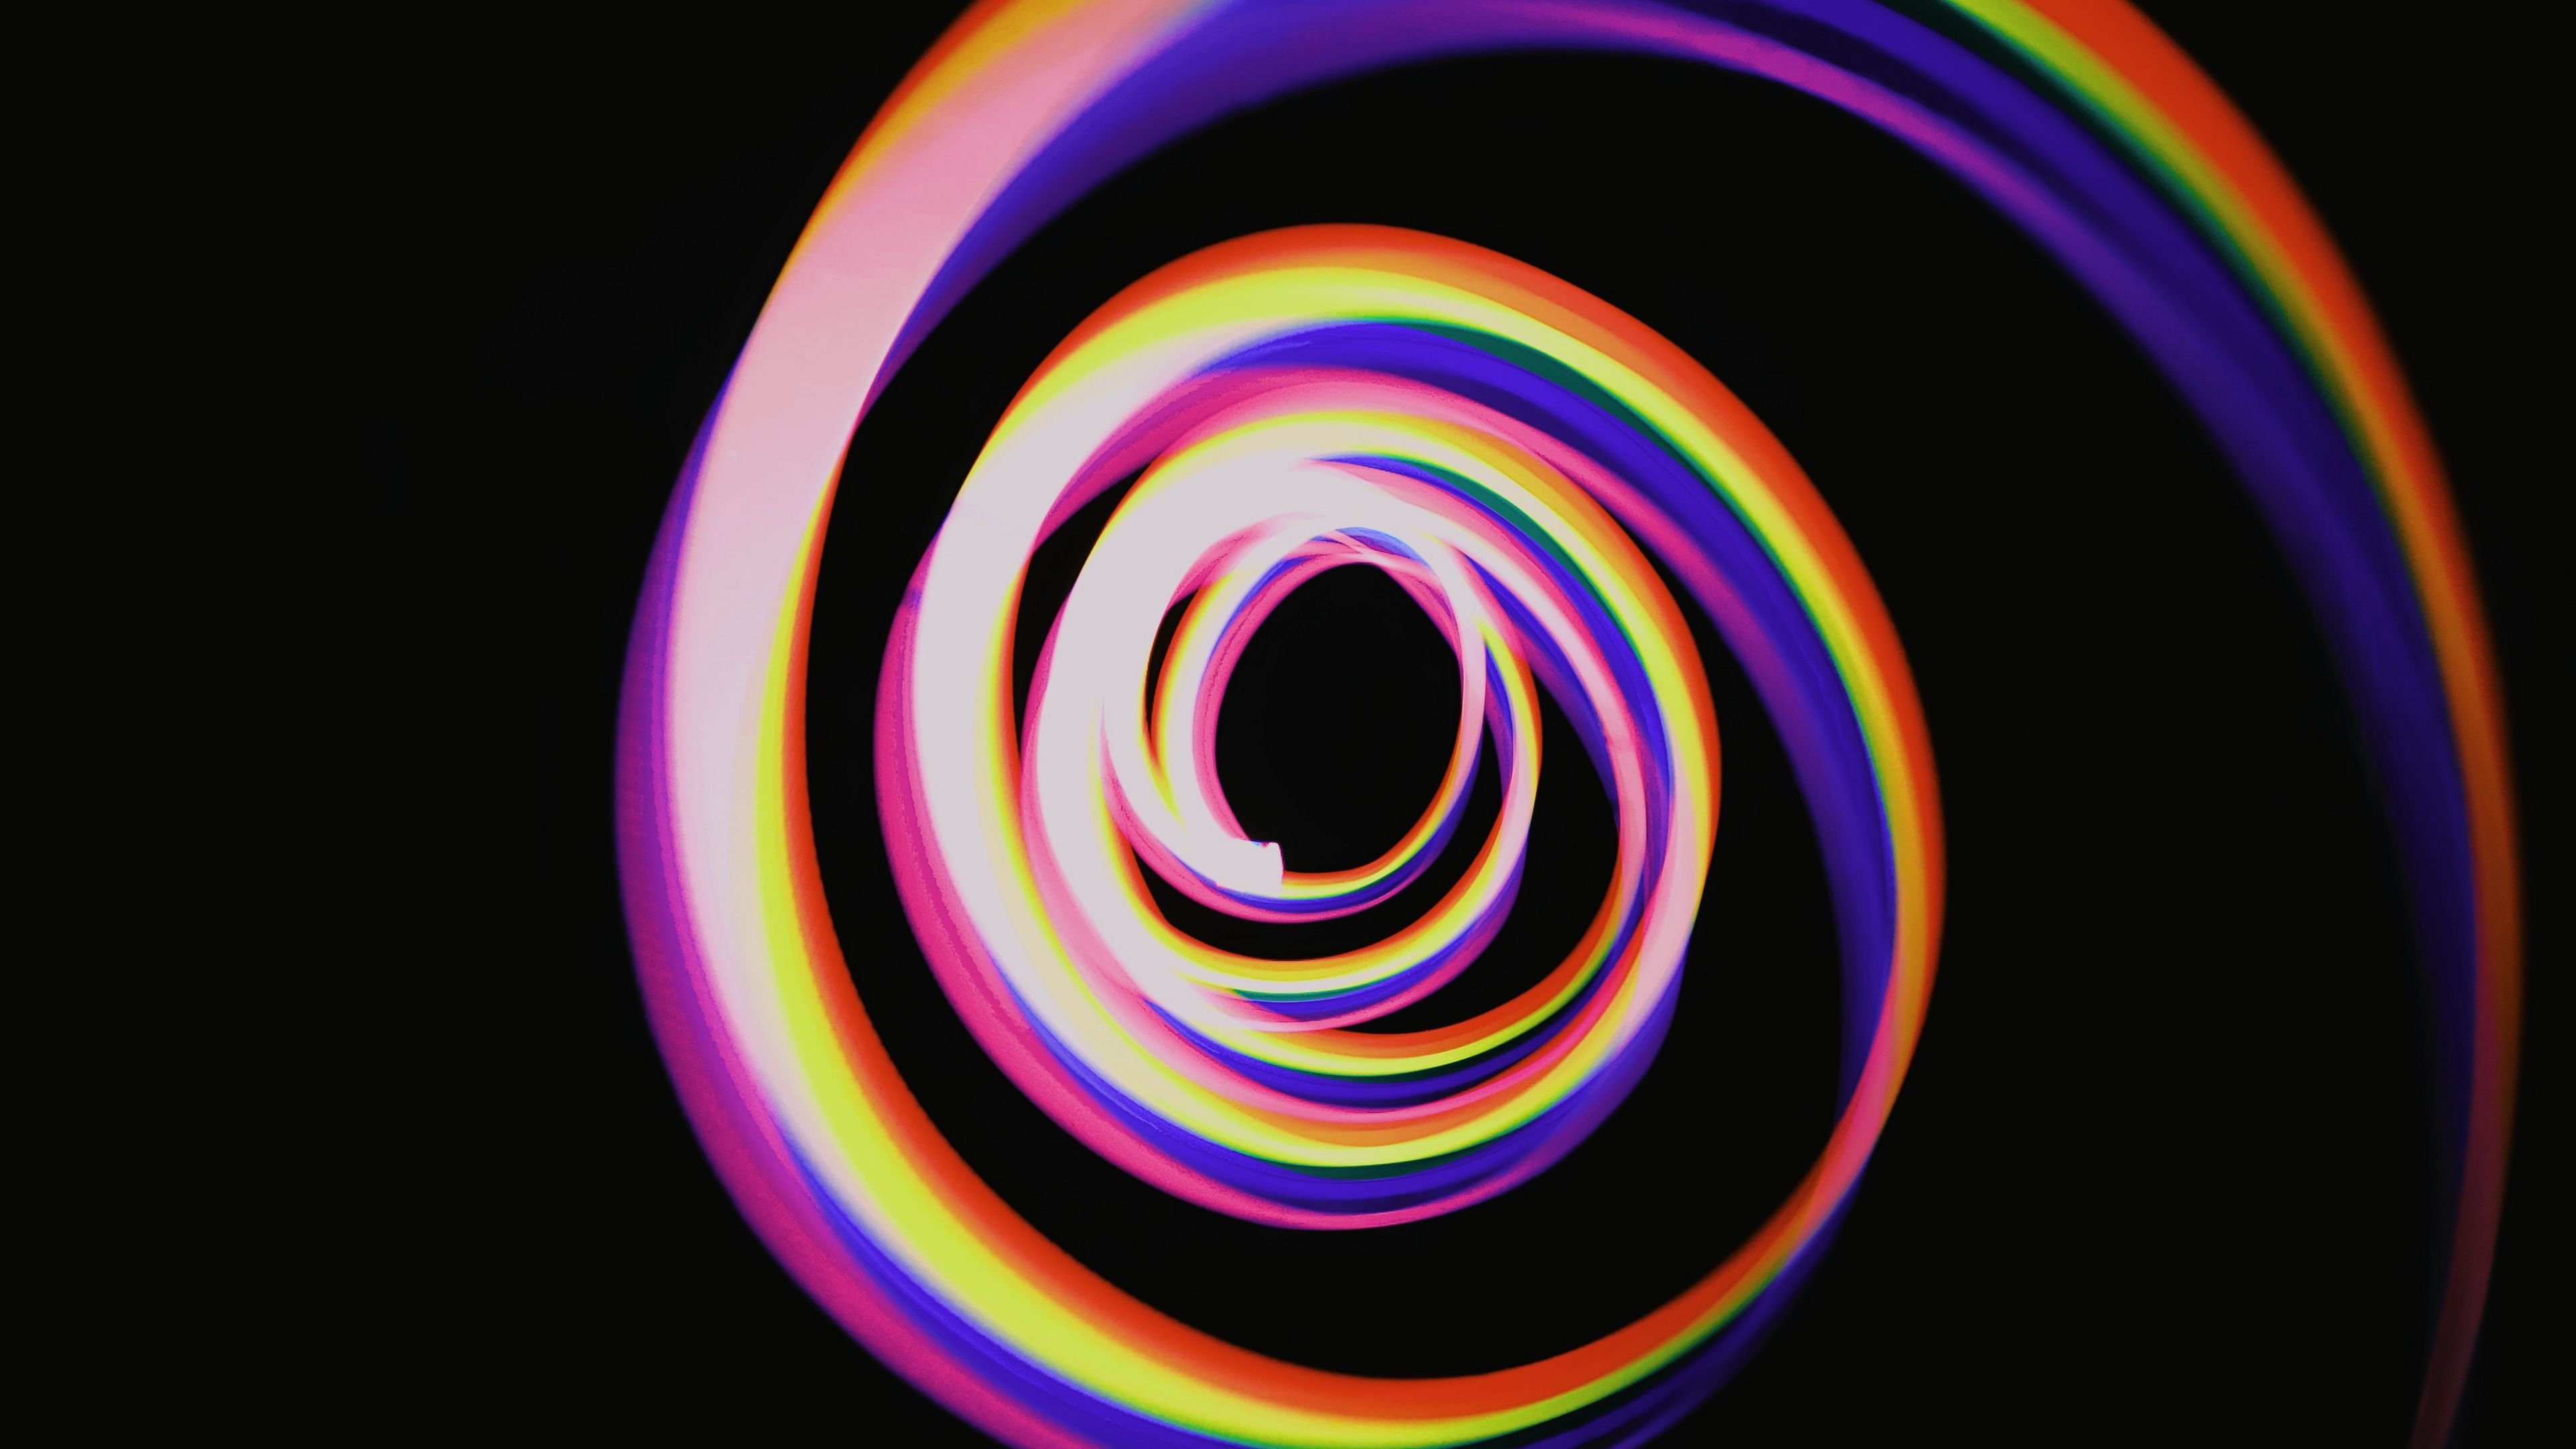 Download wallpaper 3840x2160 spiral, colorful, rainbow, light, long exposure, movement 4k uhd 16:9 HD background